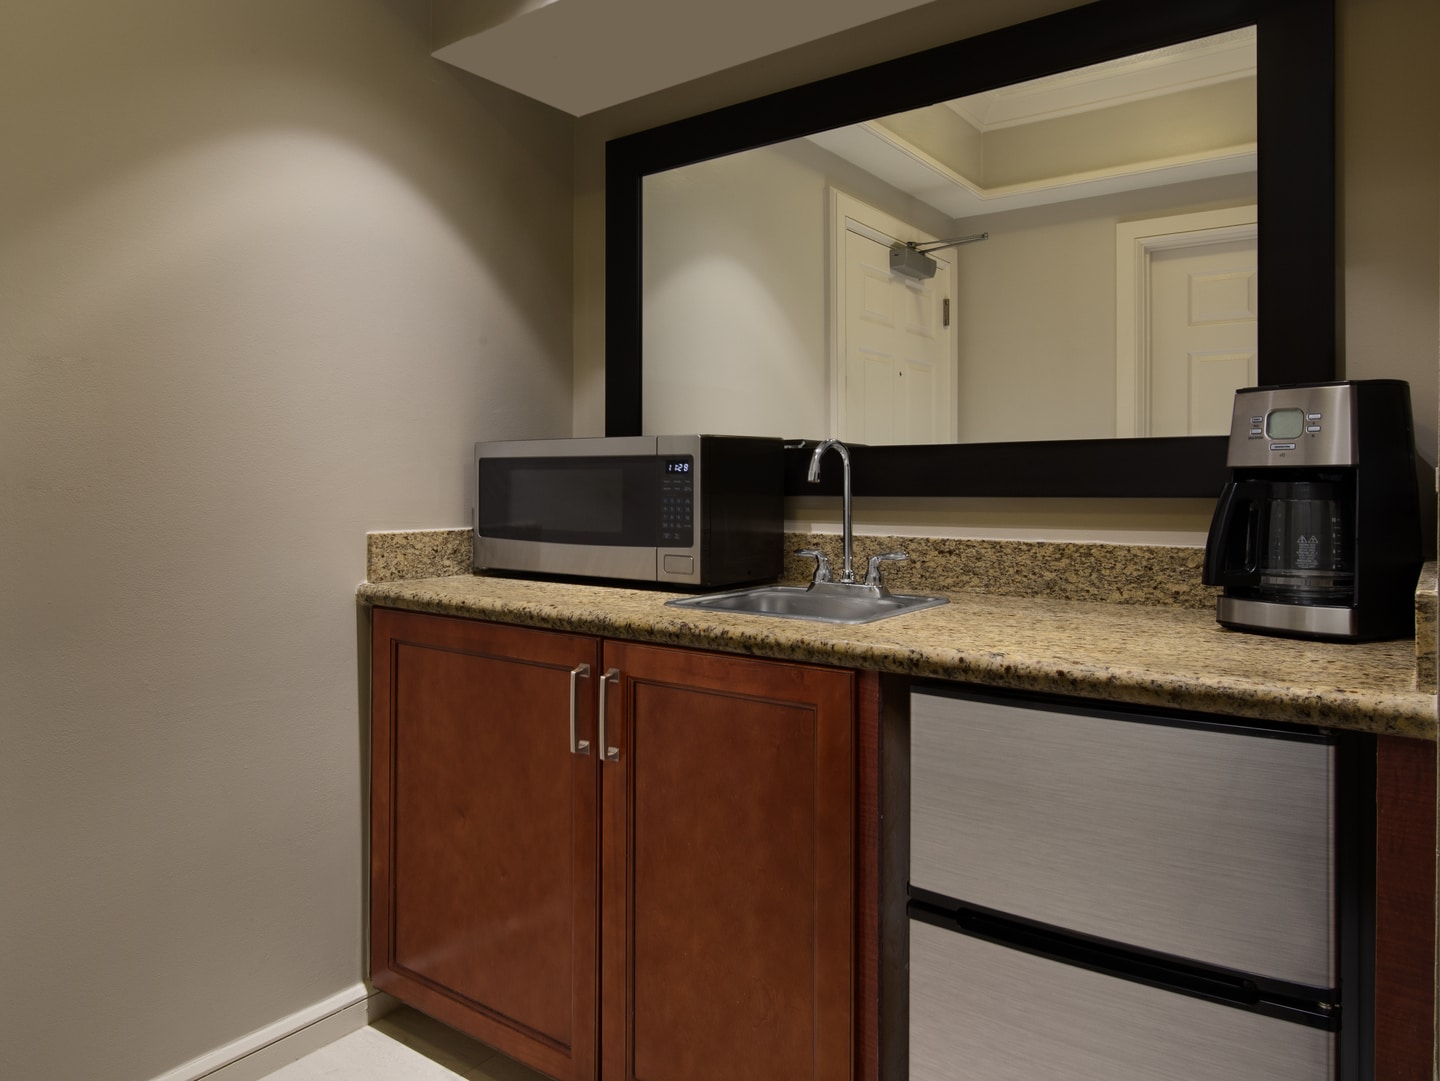 Marriott's BeachPlace Towers Villa Guest Kitchenette. Marriott's BeachPlace Towers is located in Fort Lauderdale, Florida United States.